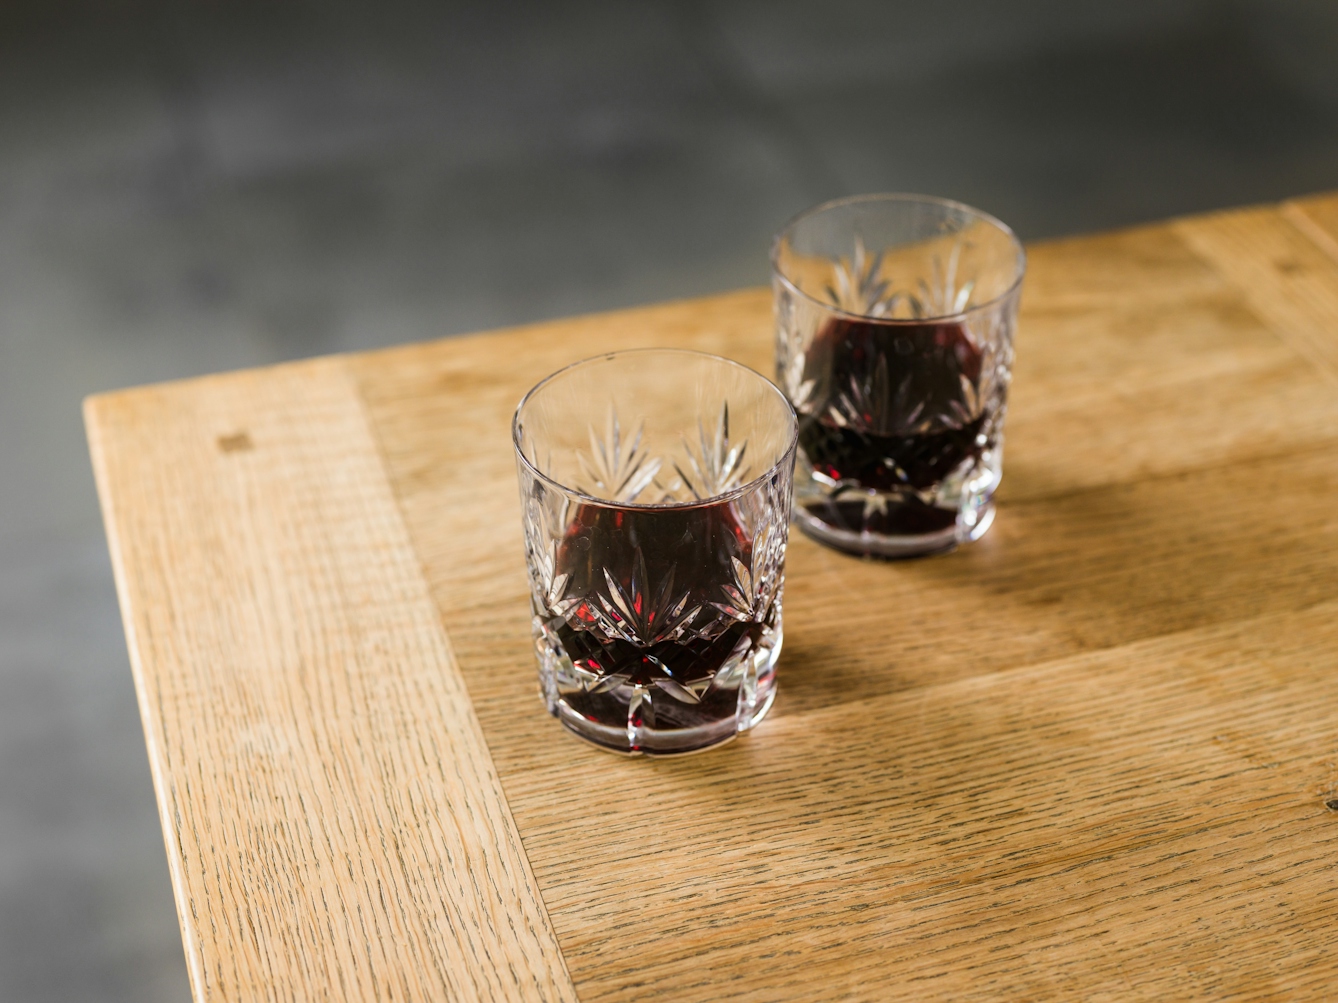 A photograph of a corner of a wooden table with two small tumbler-style glasses. The glasses contain red wine, and are filled below halfway. The glasses have detailed ridges on the outside in palmleaf-like patterns.